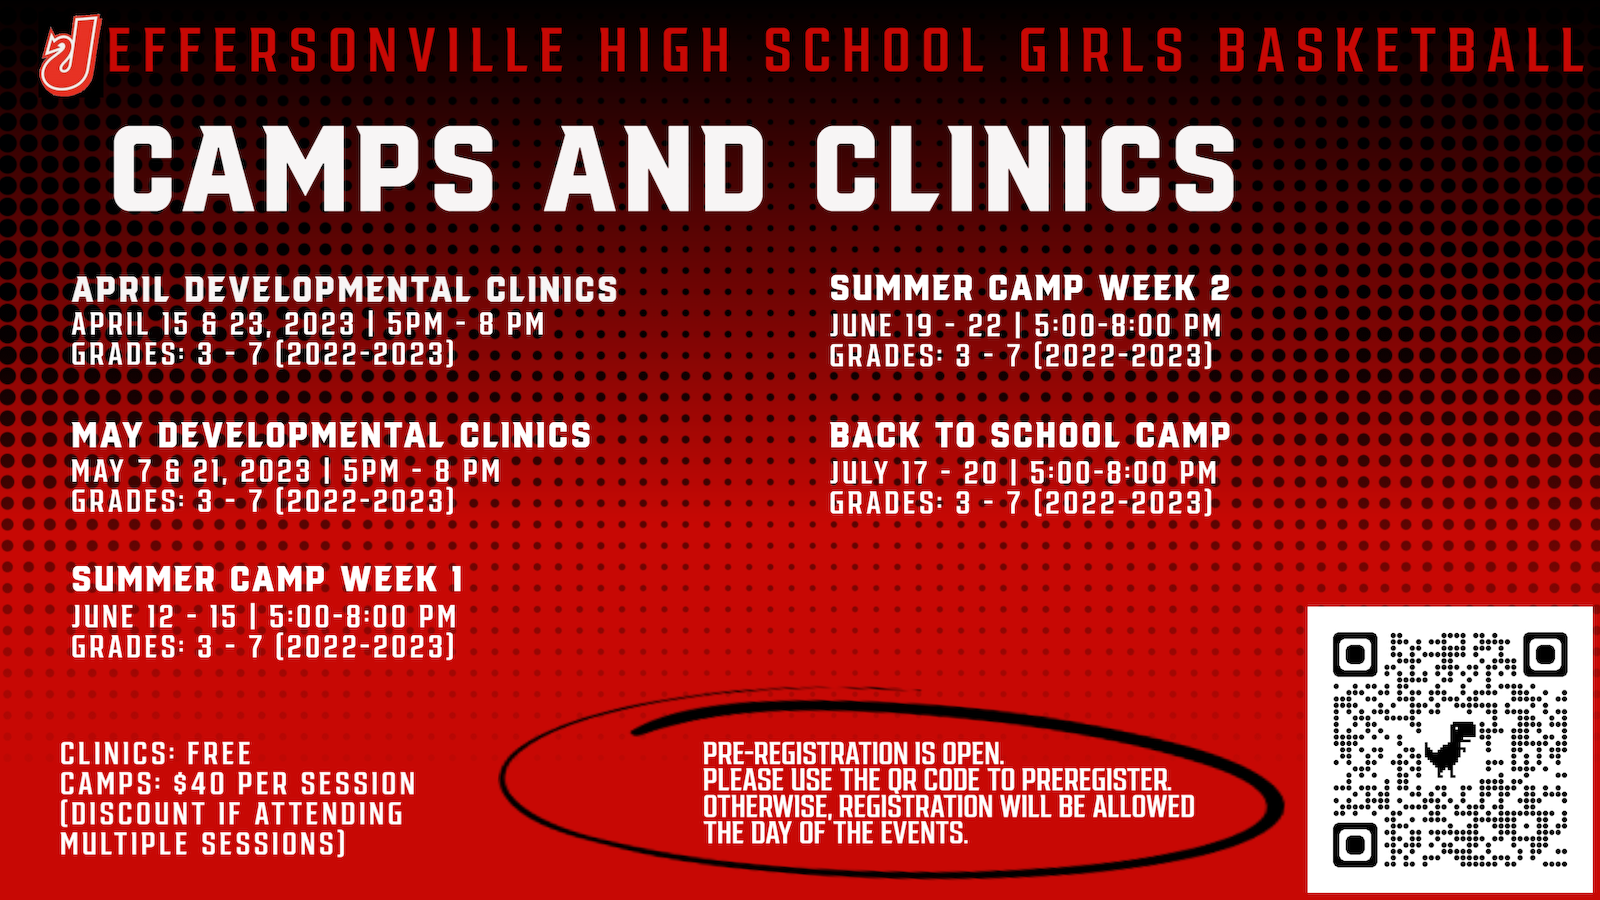 Camps and Clinics 2023 1998188.png